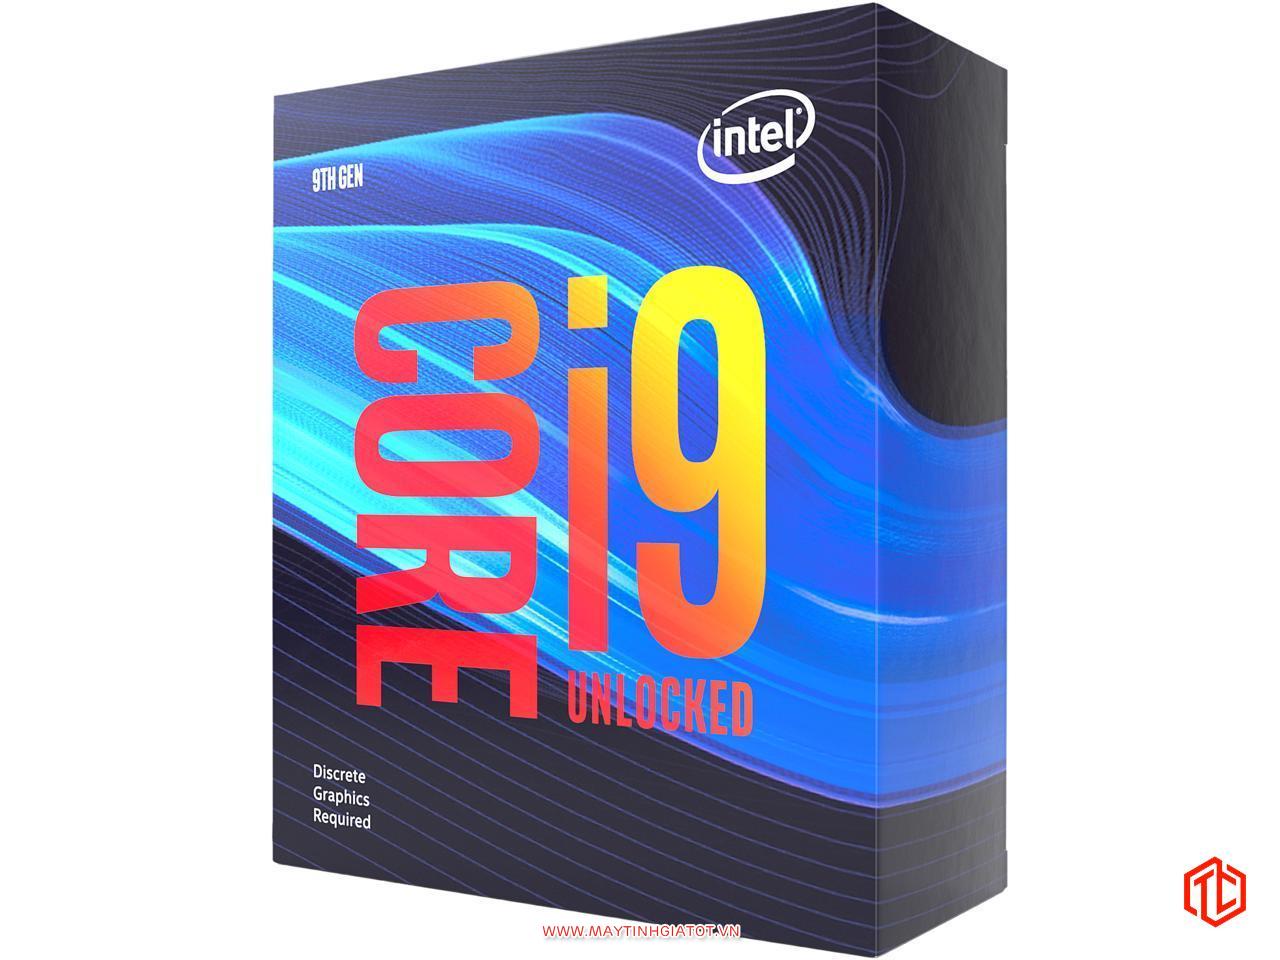 CPU intel Core i9 9900K Cũ 3.6 GHz turbo up to 5.0 GHz /8 Cores 16 Threads/16MB/Coffee Lake